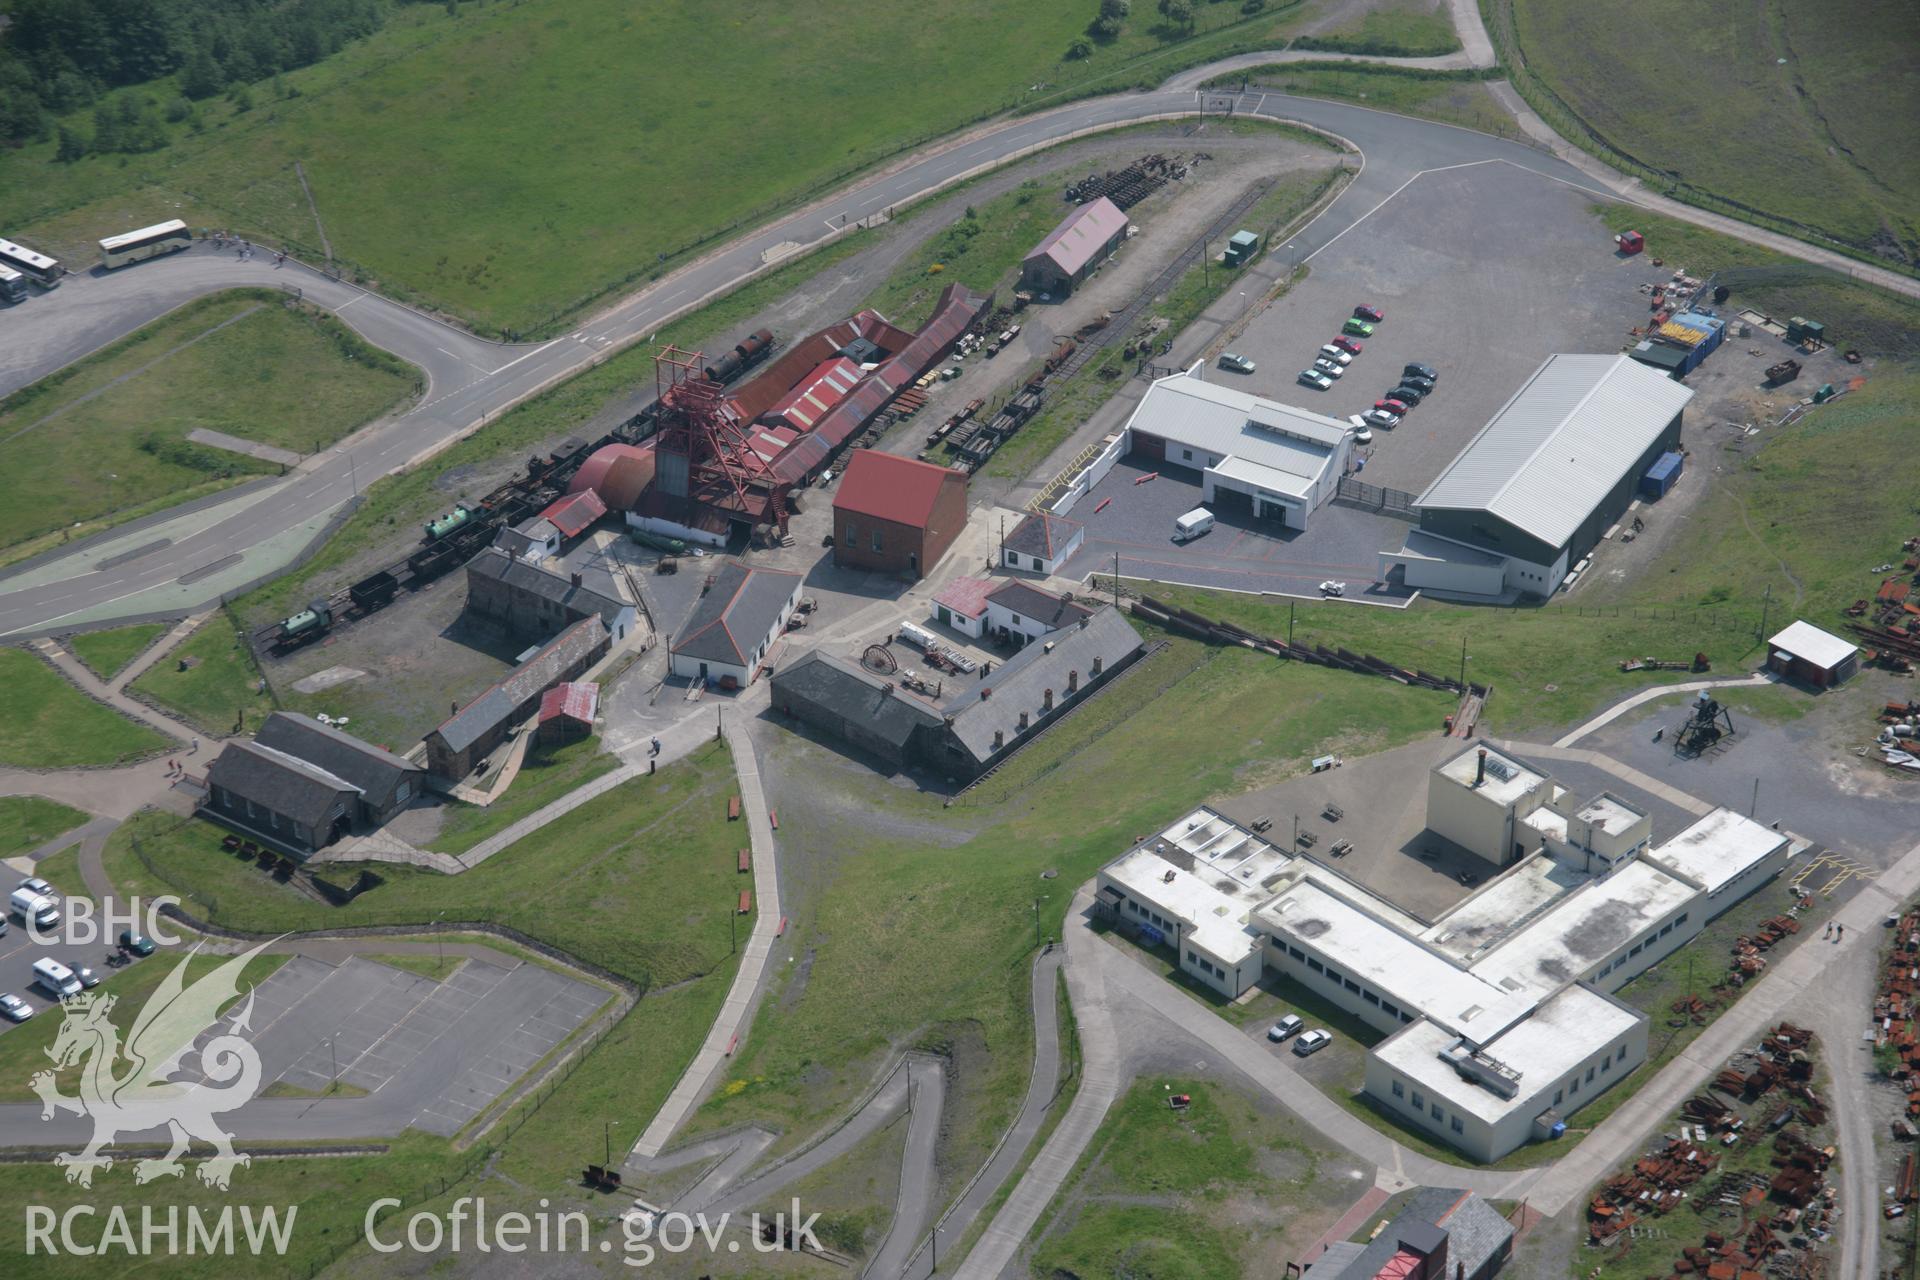 RCAHMW colour oblique aerial photograph of Big Pit Coal Mine, Blaenavon from the west. Taken on 09 June 2006 by Toby Driver.